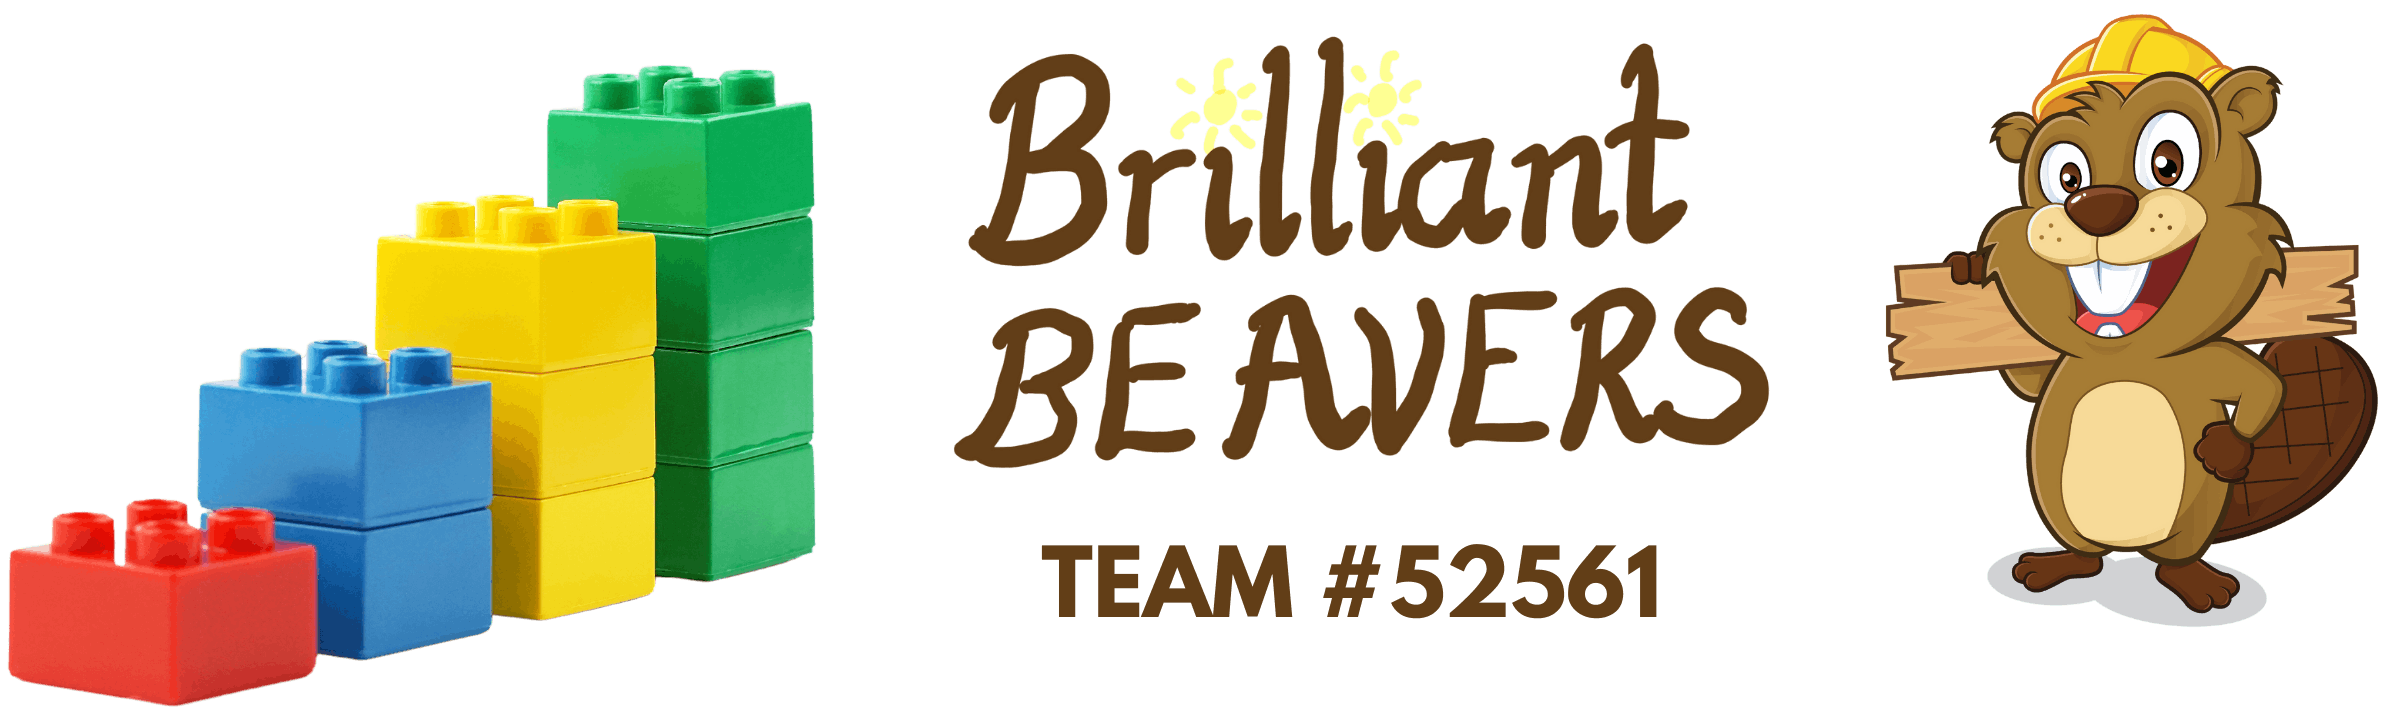 brilliant-beavers-sign3-cropped.png